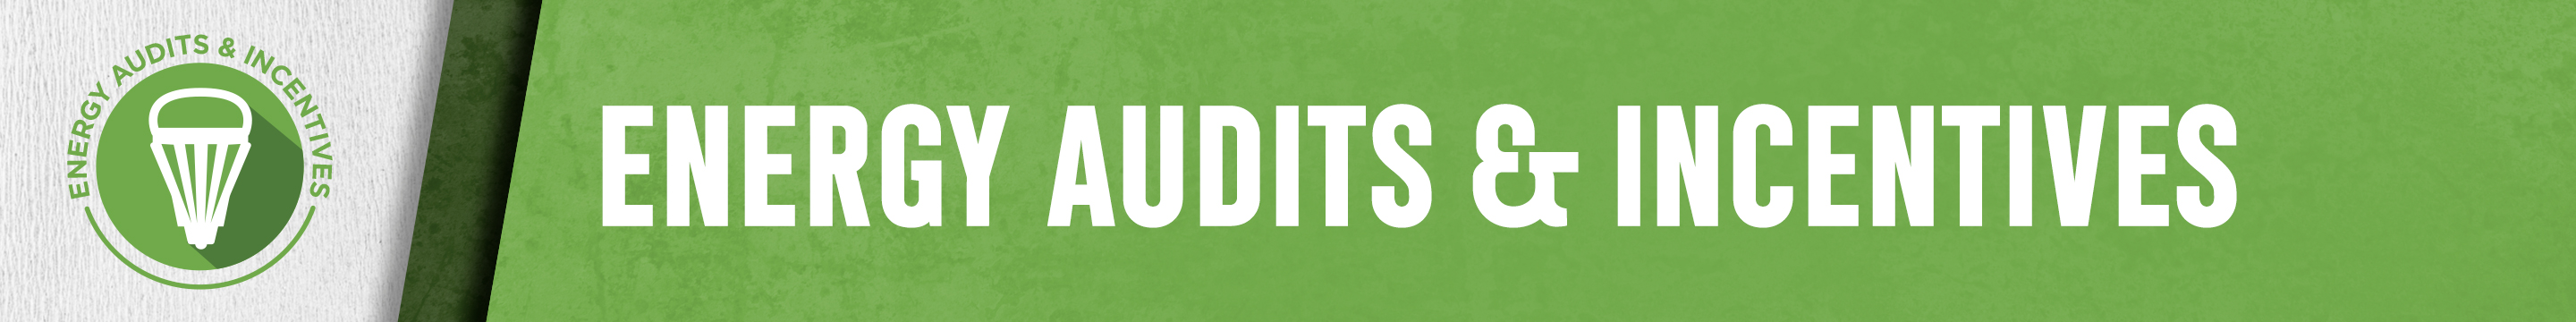 Energy Audits & Incentives